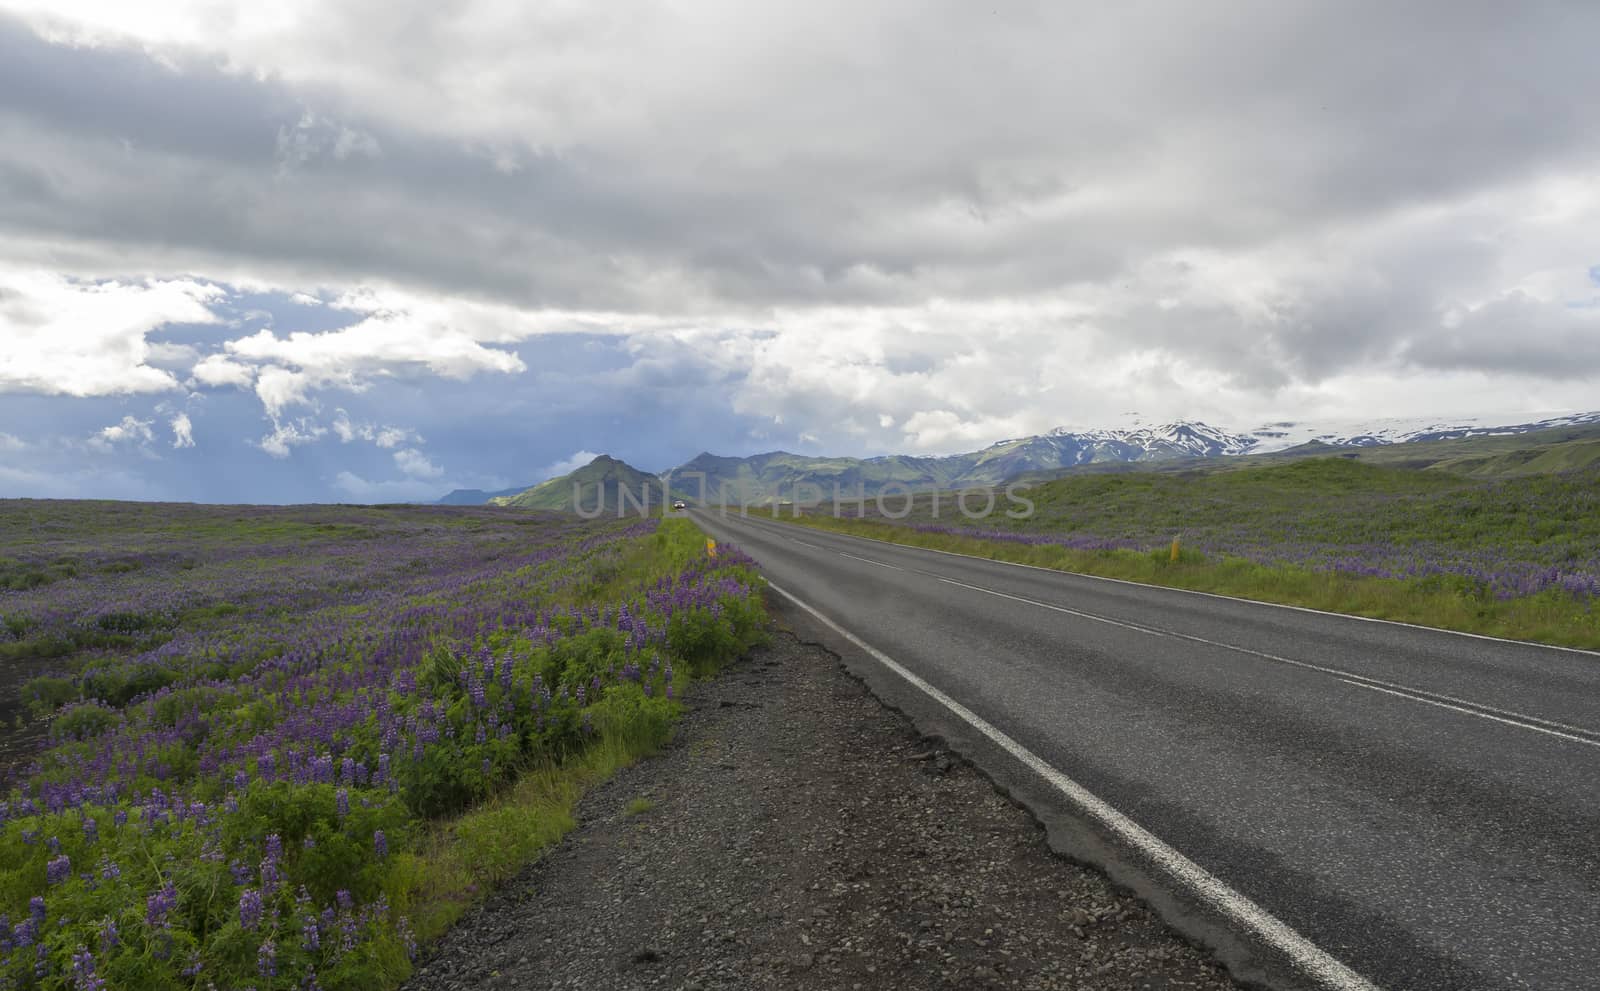 asphalt road through valley in empty rural northern landscape with green grass and hills, colorful steep mountains,pink lupine flowers and dramatic sky, Iceland western fjord, copy space